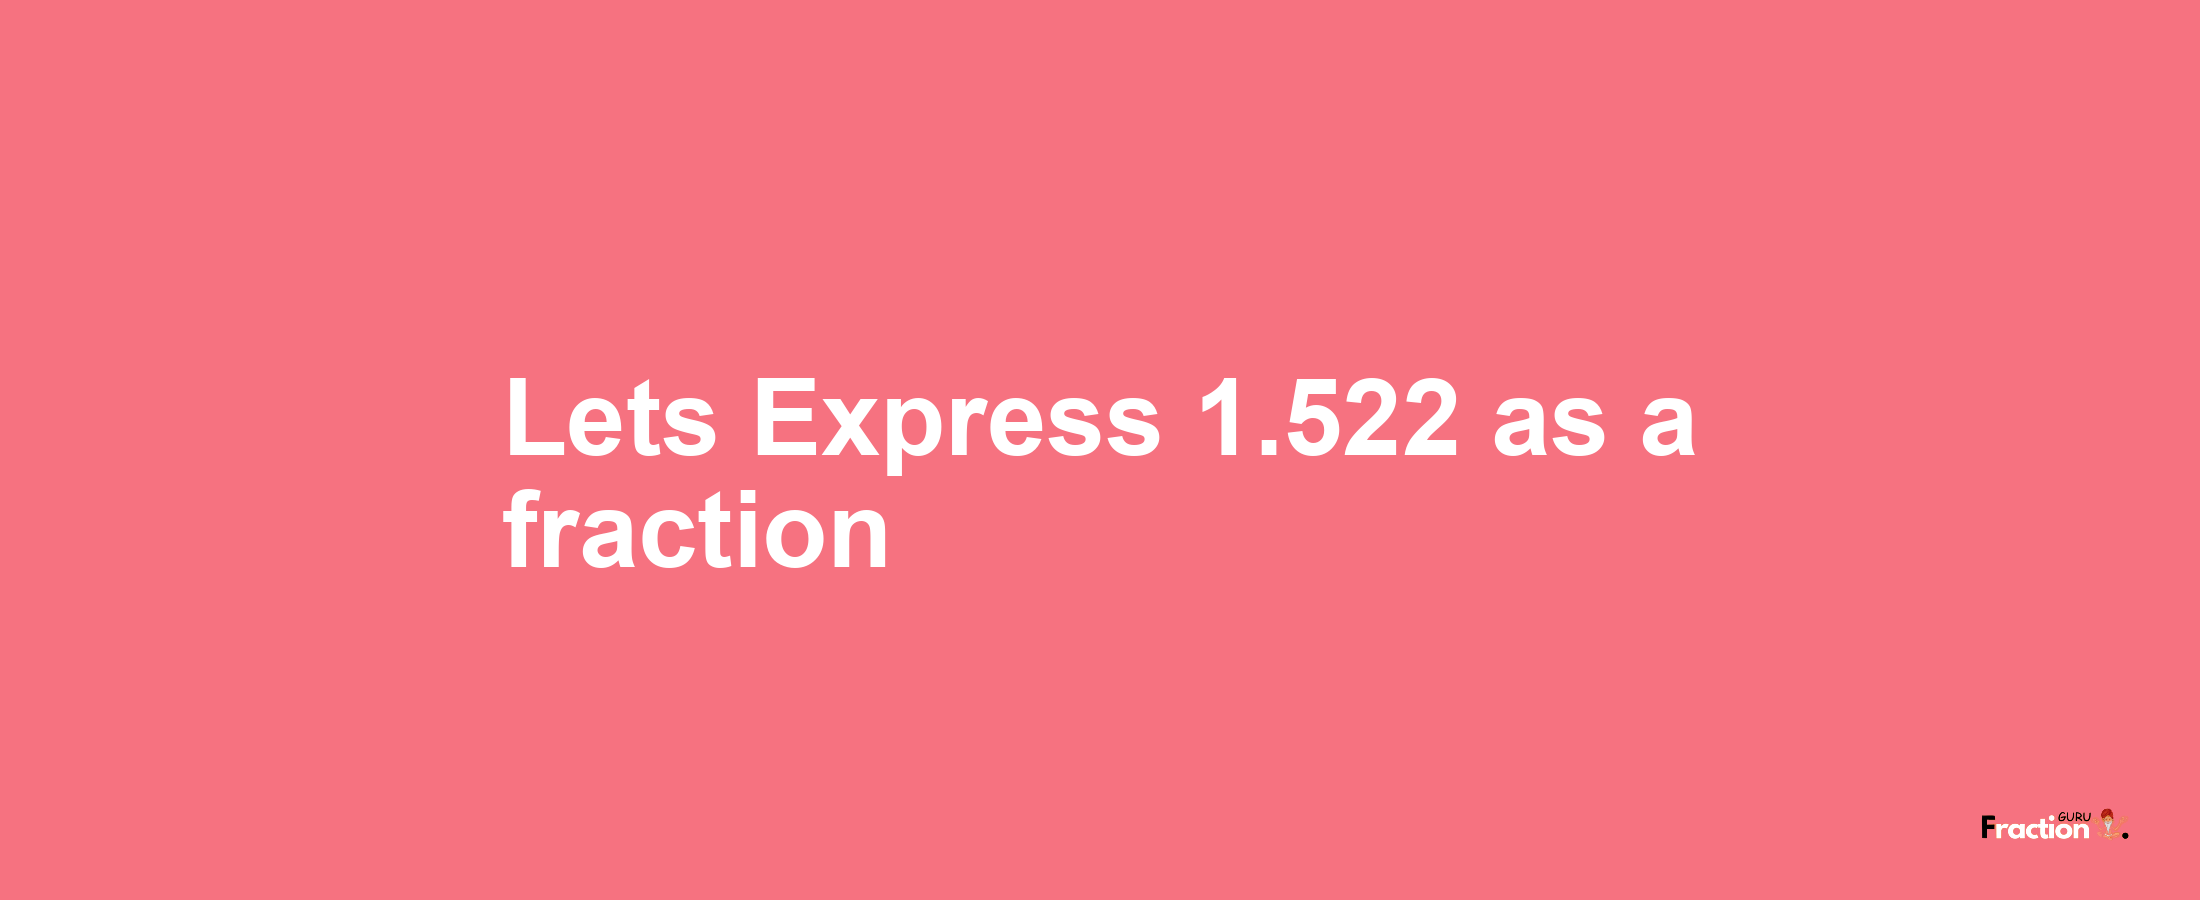 Lets Express 1.522 as afraction